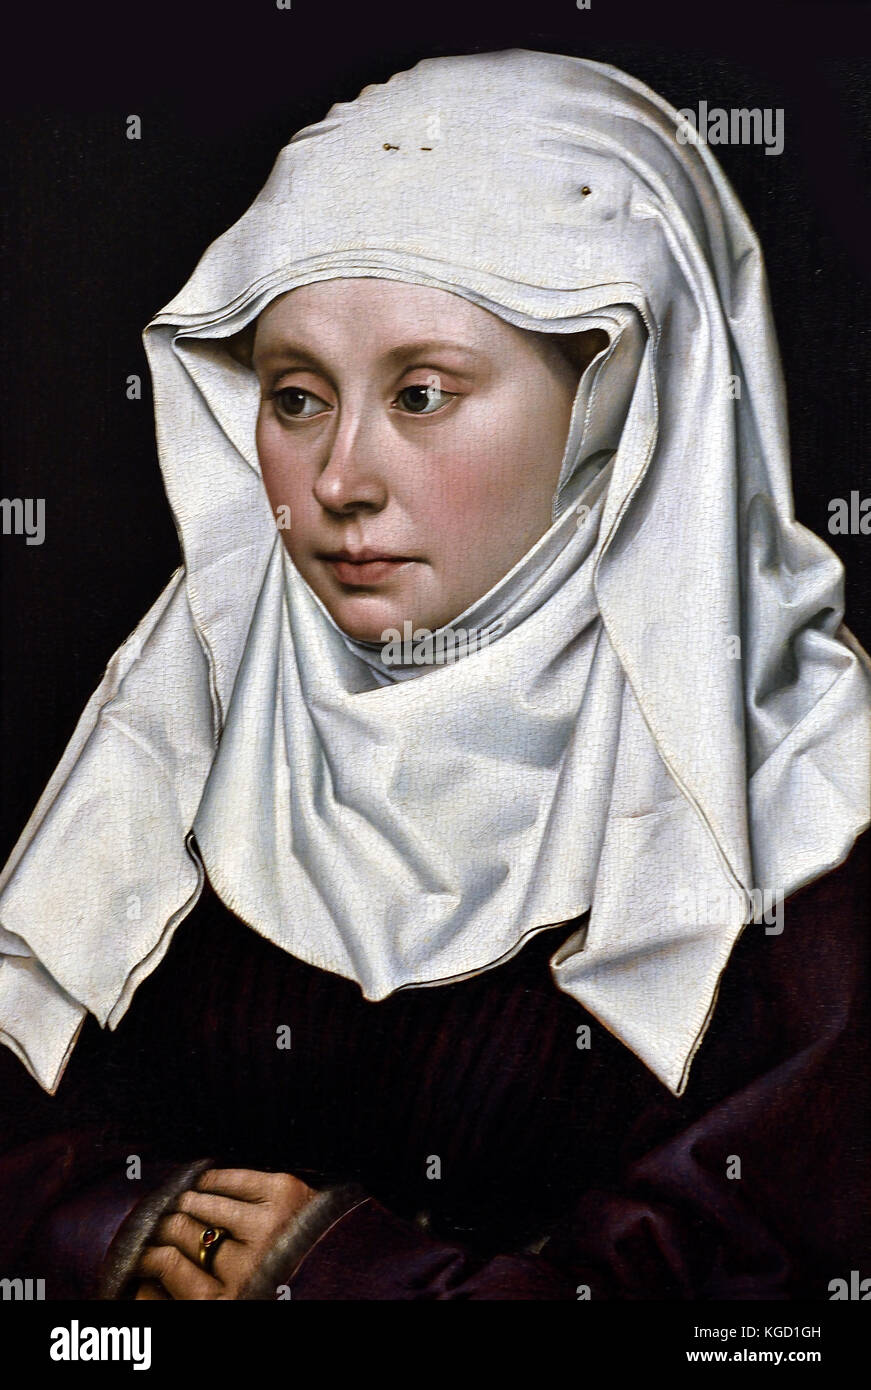 woman 1435 This painting is part of the group: A Man and a Woman Robert Campin 1375 – 1444 , Master of Flémalle - Master of the Merode Triptych, before first great master of Flemish and Early Netherlandish painting. Dutch, Netherlands. Stock Photo